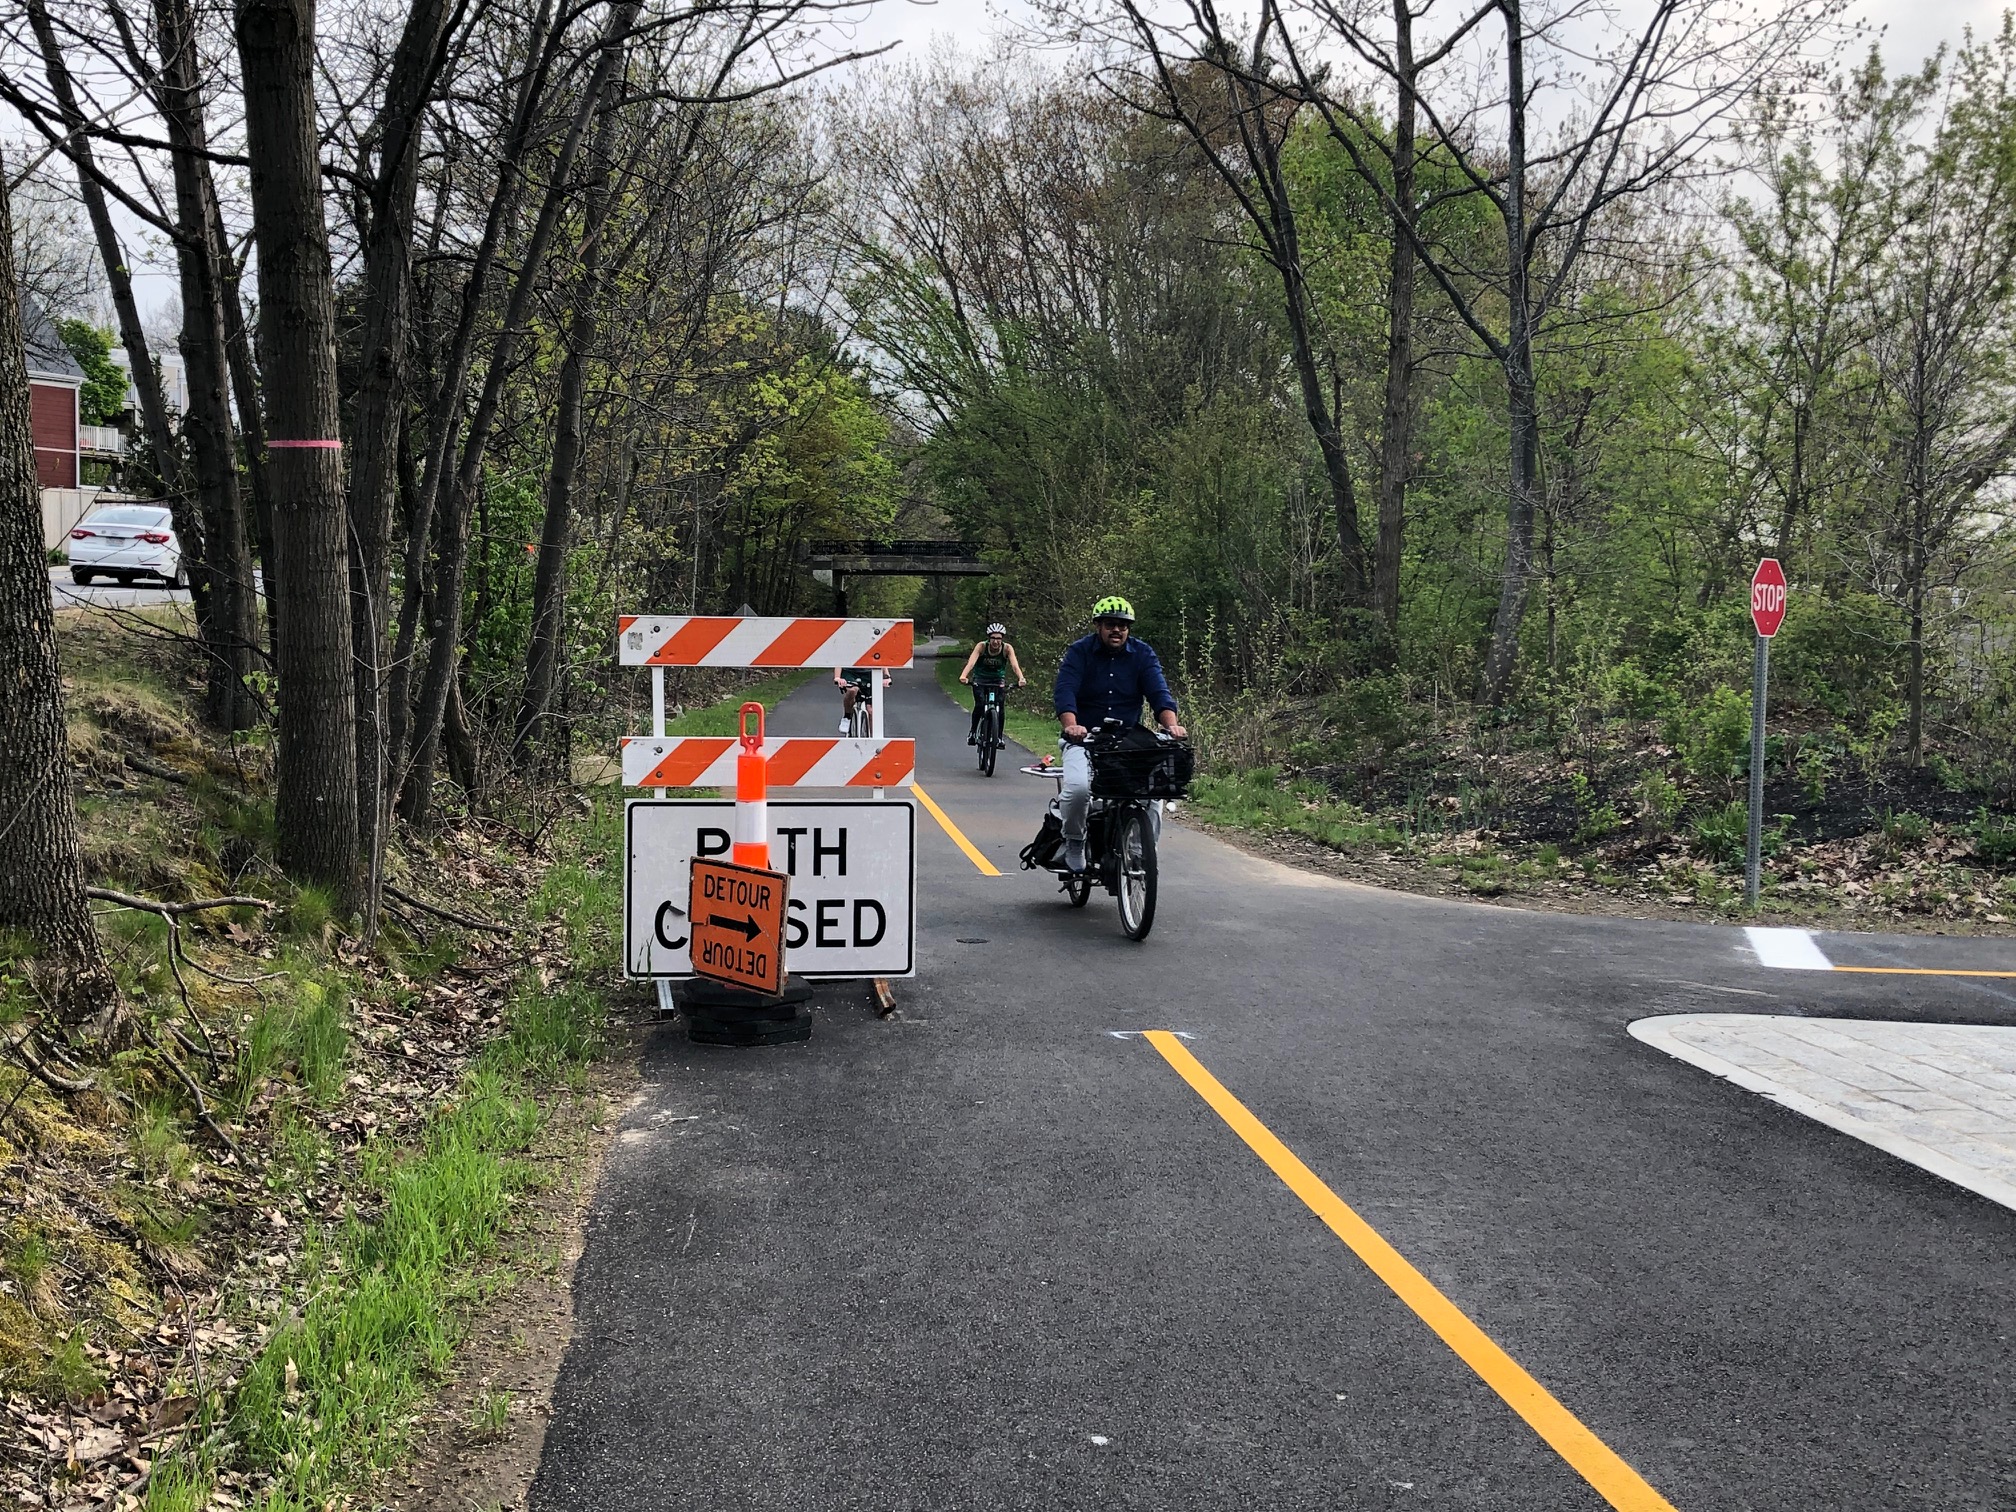 A "Path closed" sign is obscured by a construction cone and "detour" sign at the northern end of the Watertown-Cambridge Greenway in Cambridge while three people on bikes ride past.